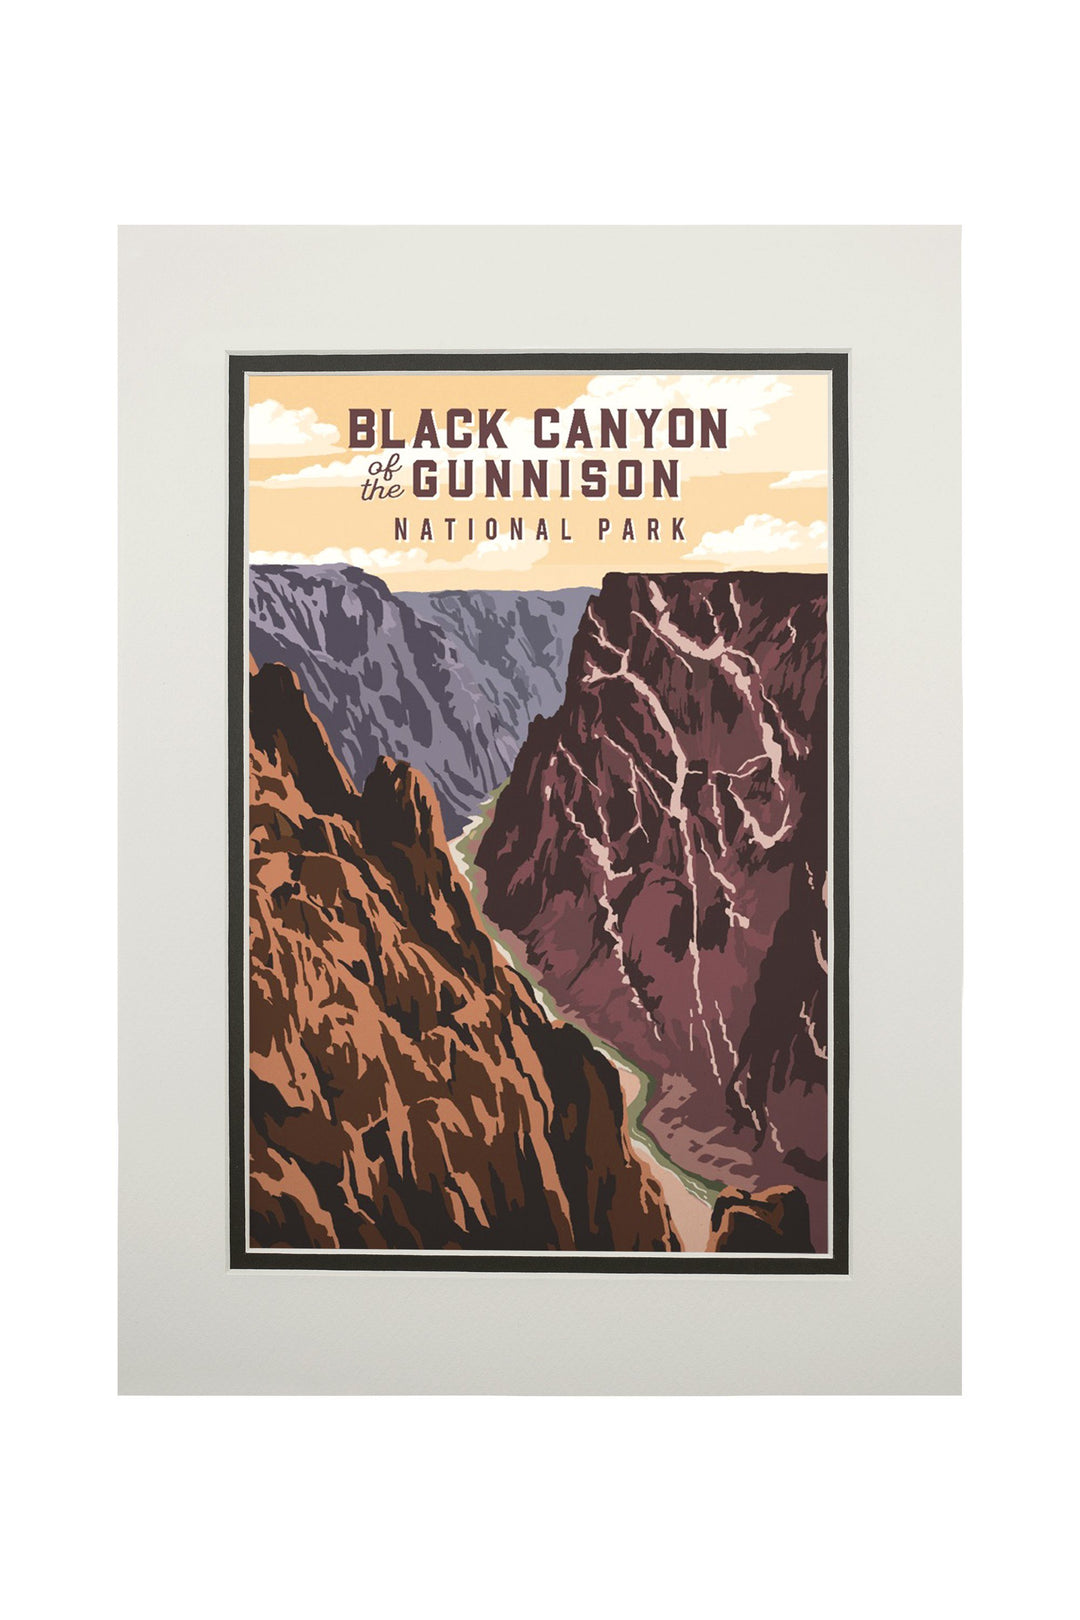 Black Canyon of the Gunnison National Park, Colorado, Painterly National Park Series, Art Prints and Metal Signs Art Lantern Press 11 x 14 Matted Art Print 